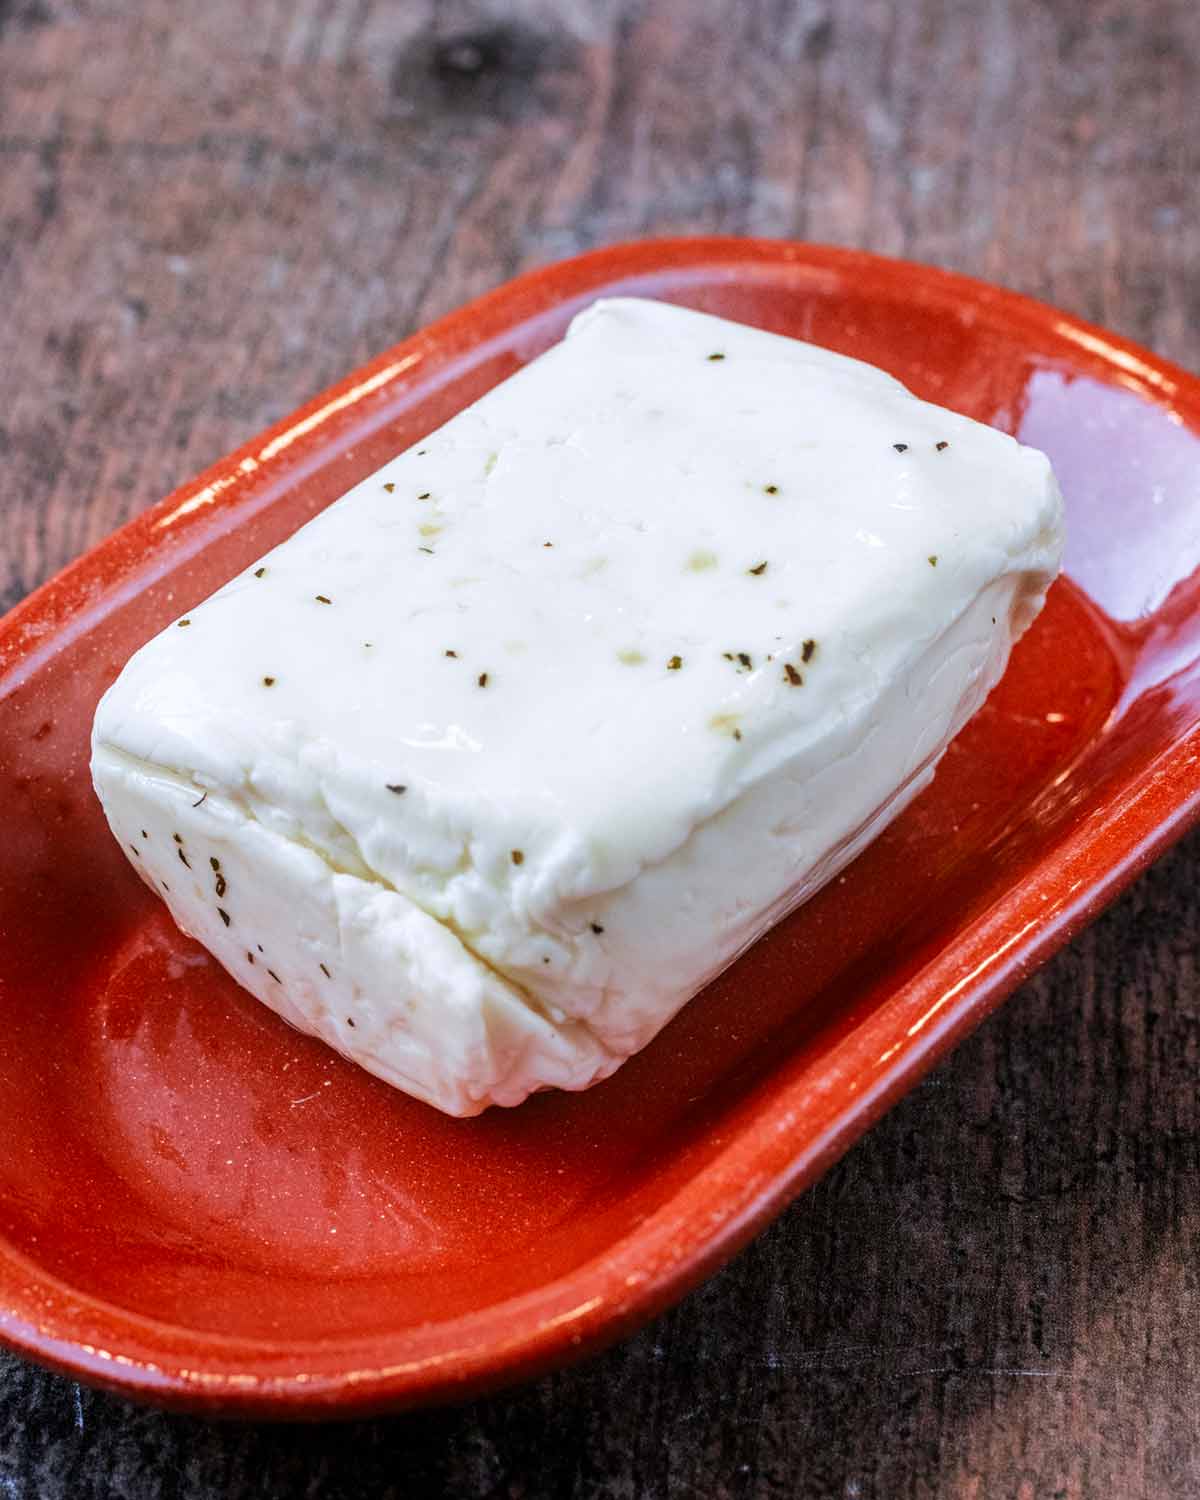 A block of halloumi on a red plate.